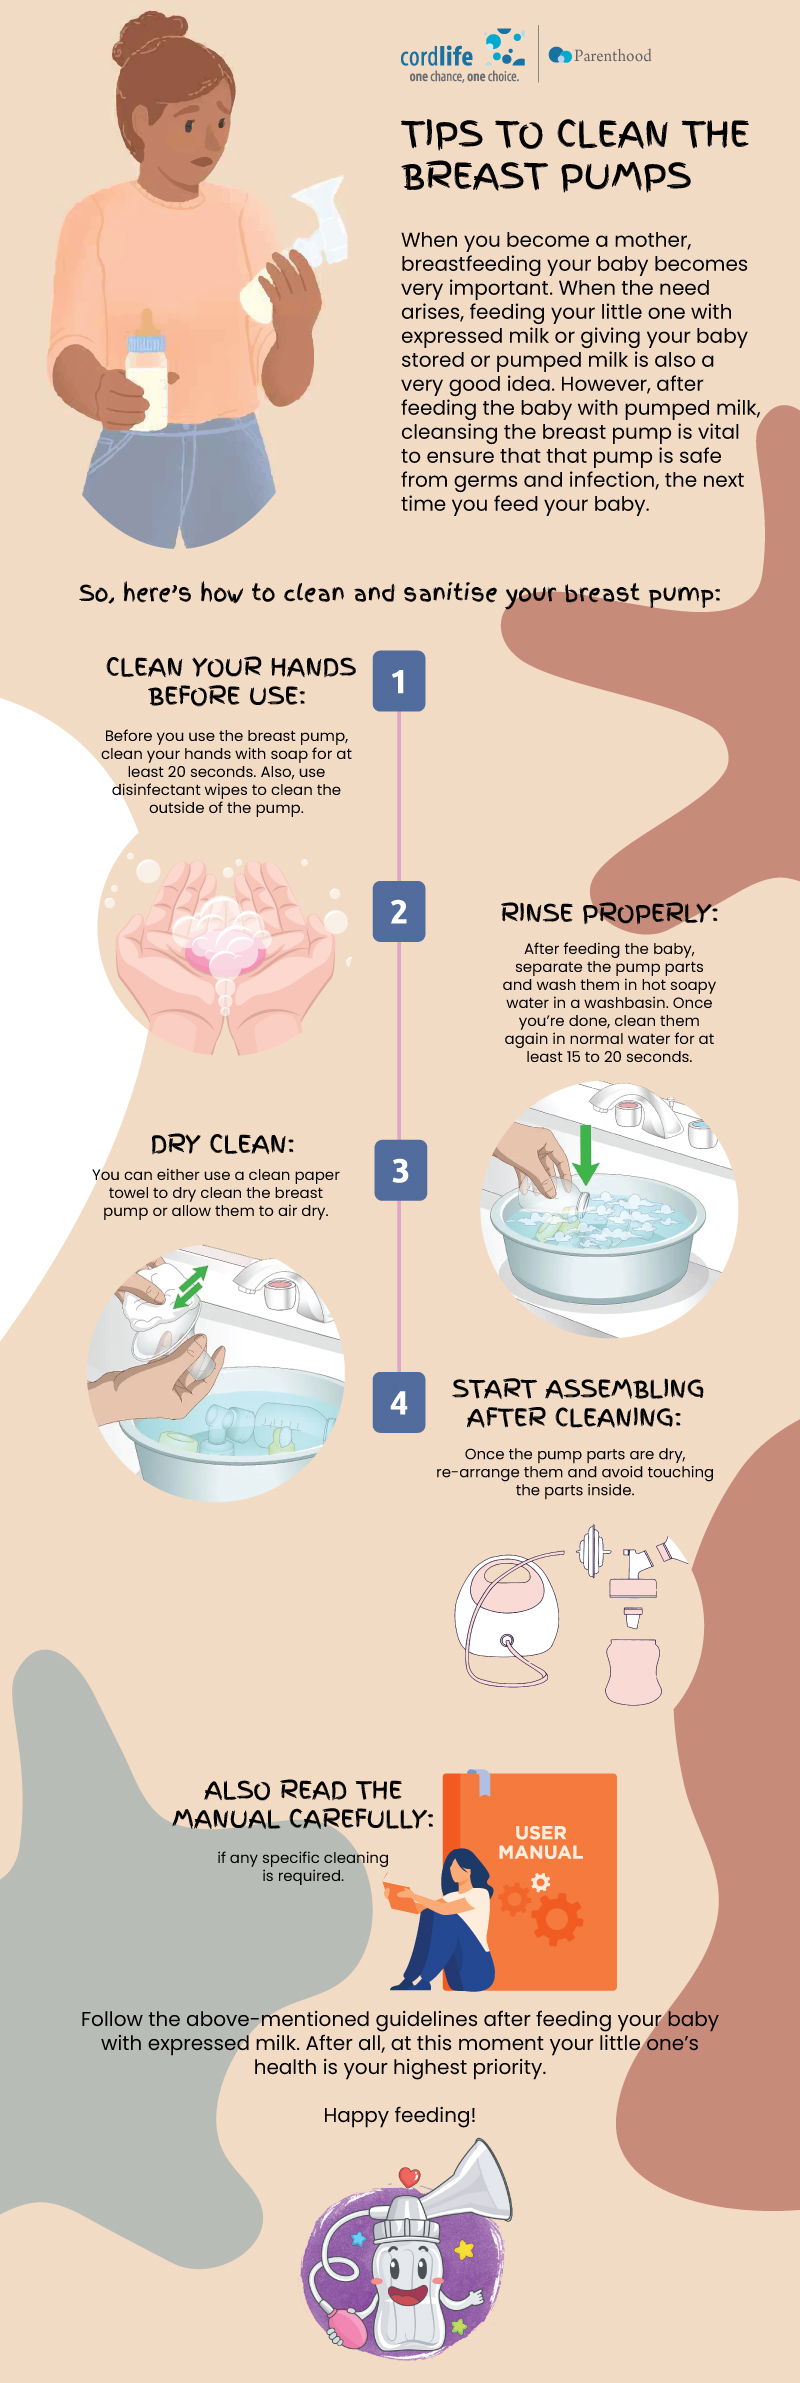 Tips to clean the breast pumps